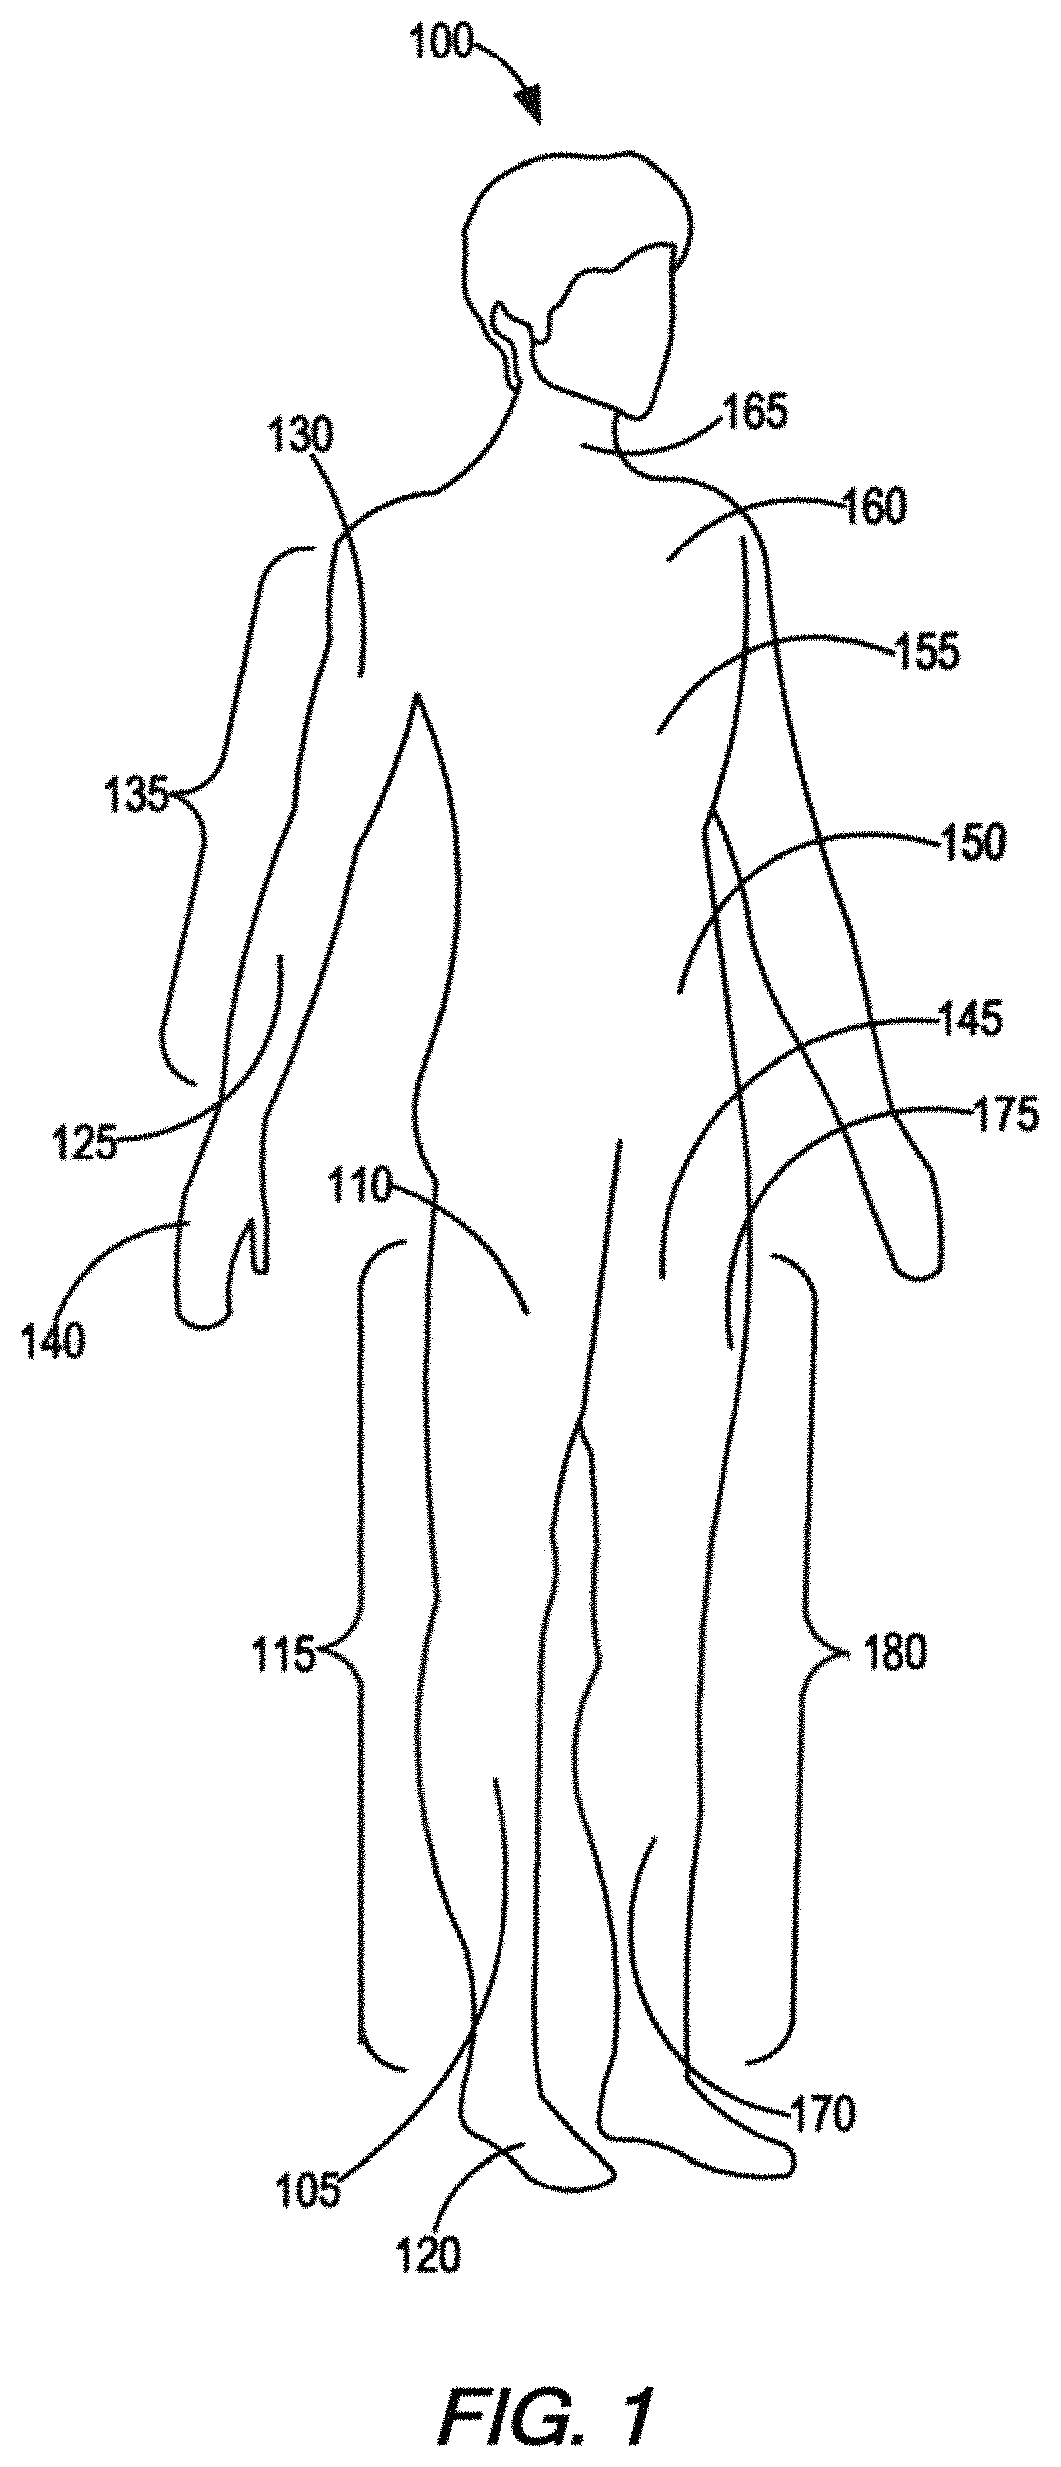 Methods and systems for identifying body part or body area anatomical landmarks from digital imagery for the fitting of compression garments for a person in need thereof